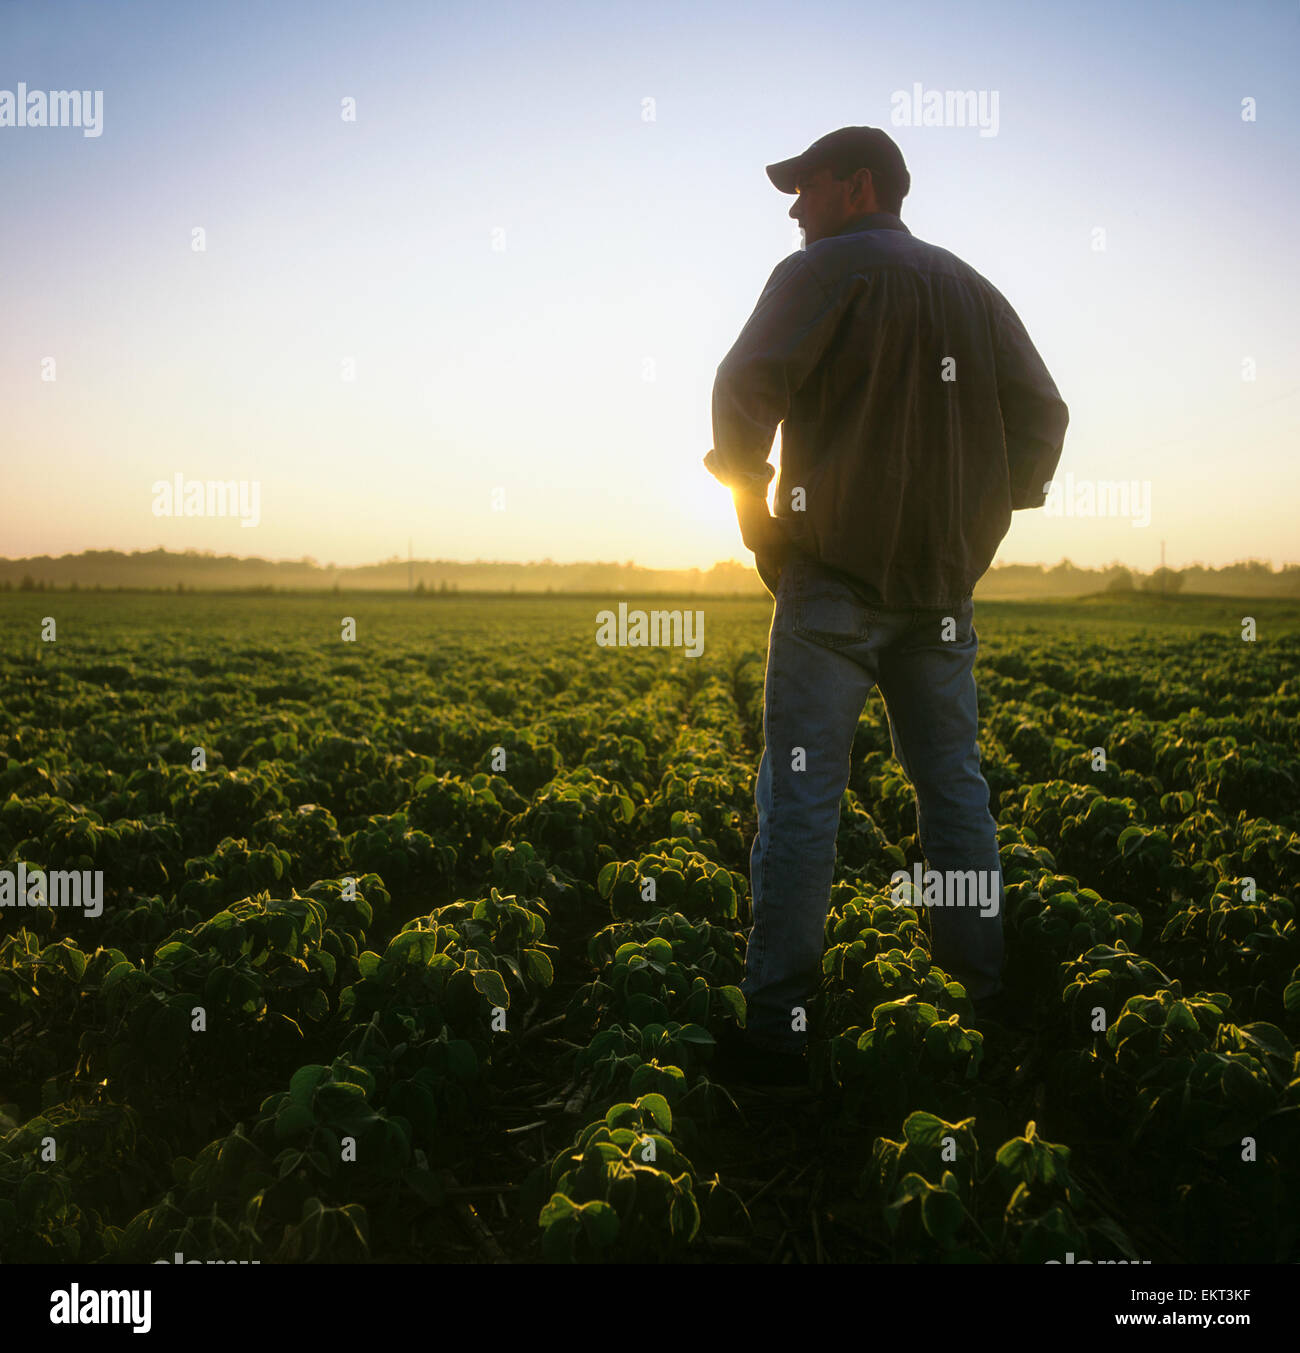 Agriculture - A farmer looks out across his early growth soybean crop at sunrise, inspecting it Stock Photo